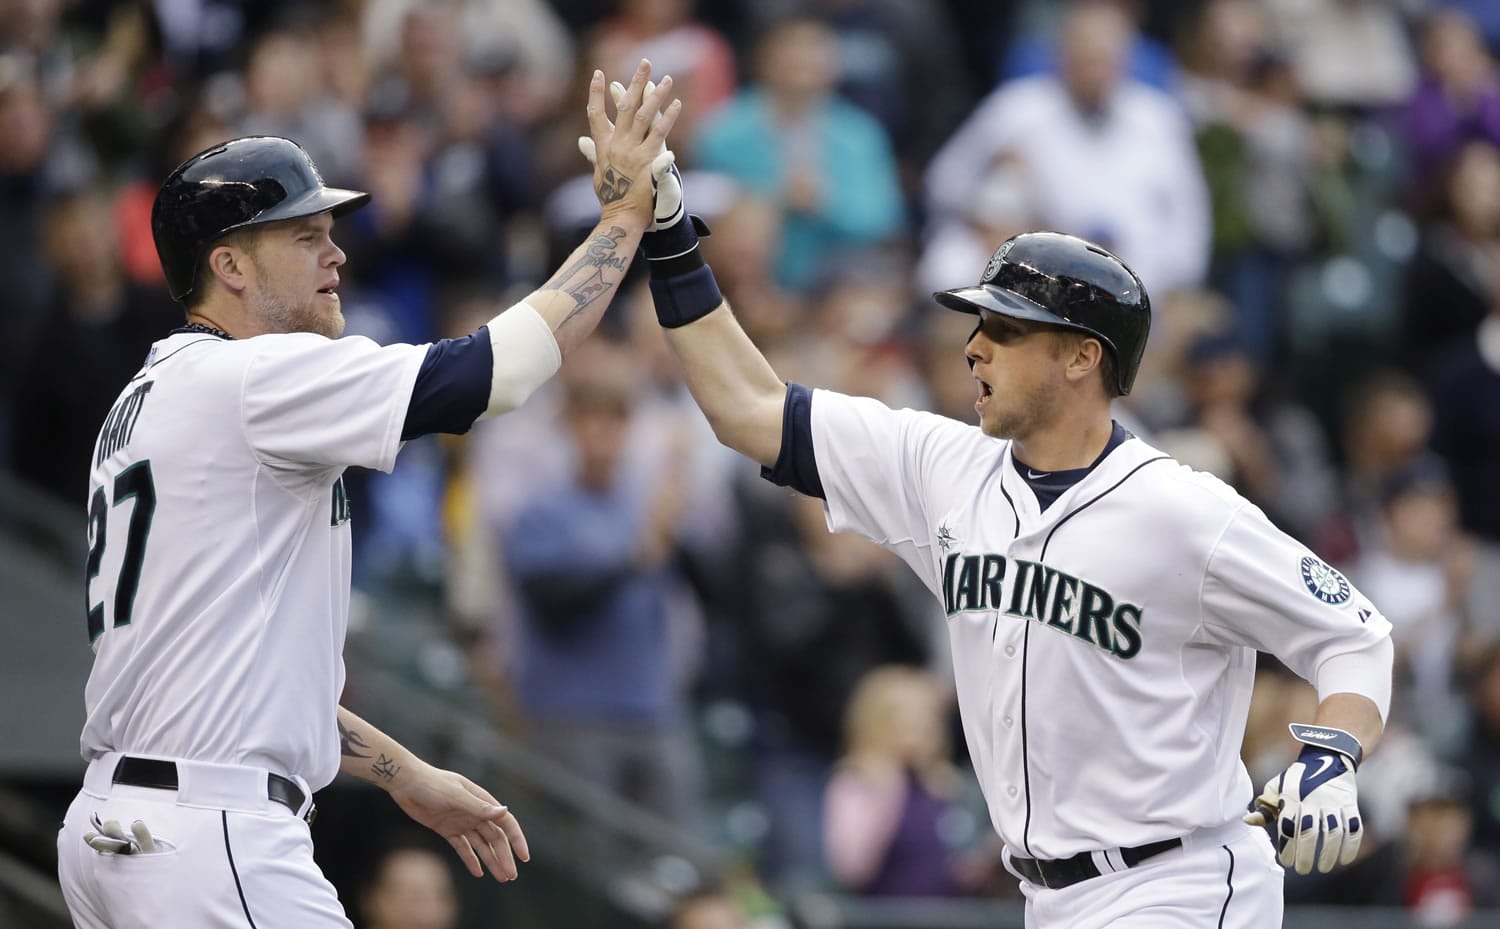 Seattle Mariners' Justin Smoak, right, is congratulated by Corey Hart as he crosses home on his two-run home run against the Kansas City Royals in the fourth inning Saturday.